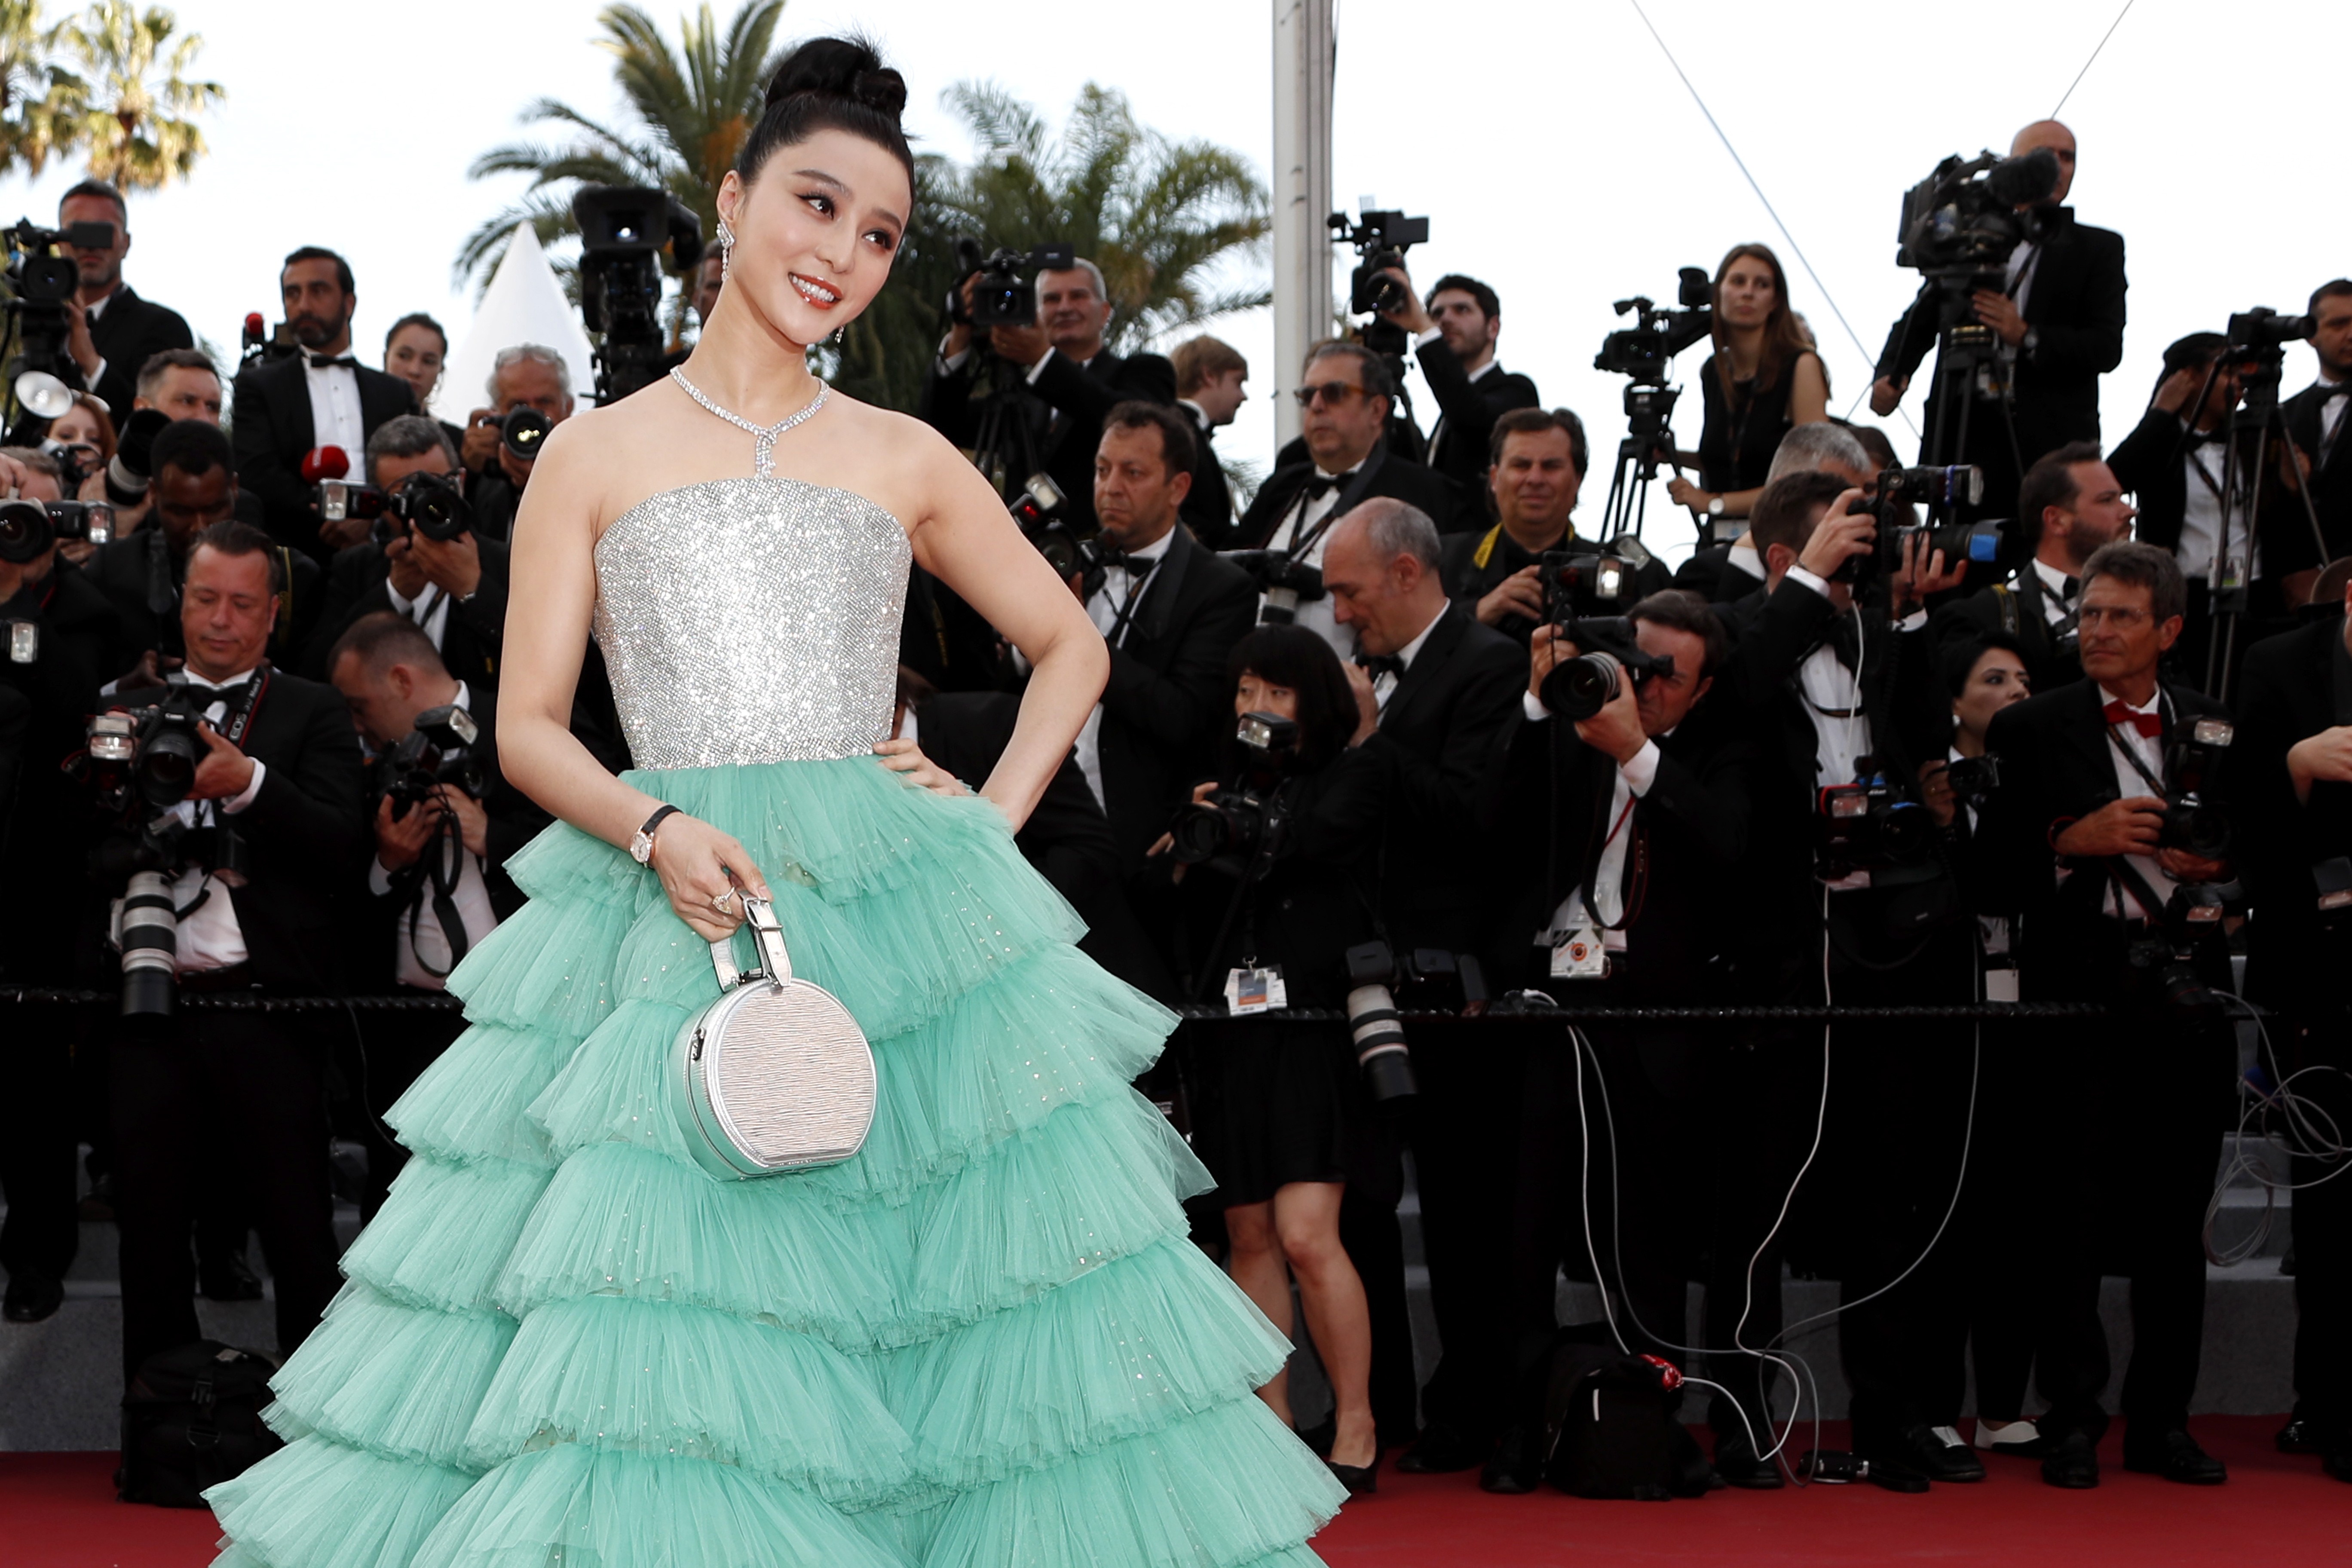 Fan Bingbing arrives for the opening ceremony of the 71st annual Cannes Film Festival in May 2018. China’s tax authorities ordered the actress to pay nearly 884 million yuan in overdue taxes and fines on October 3. Photo: EPA